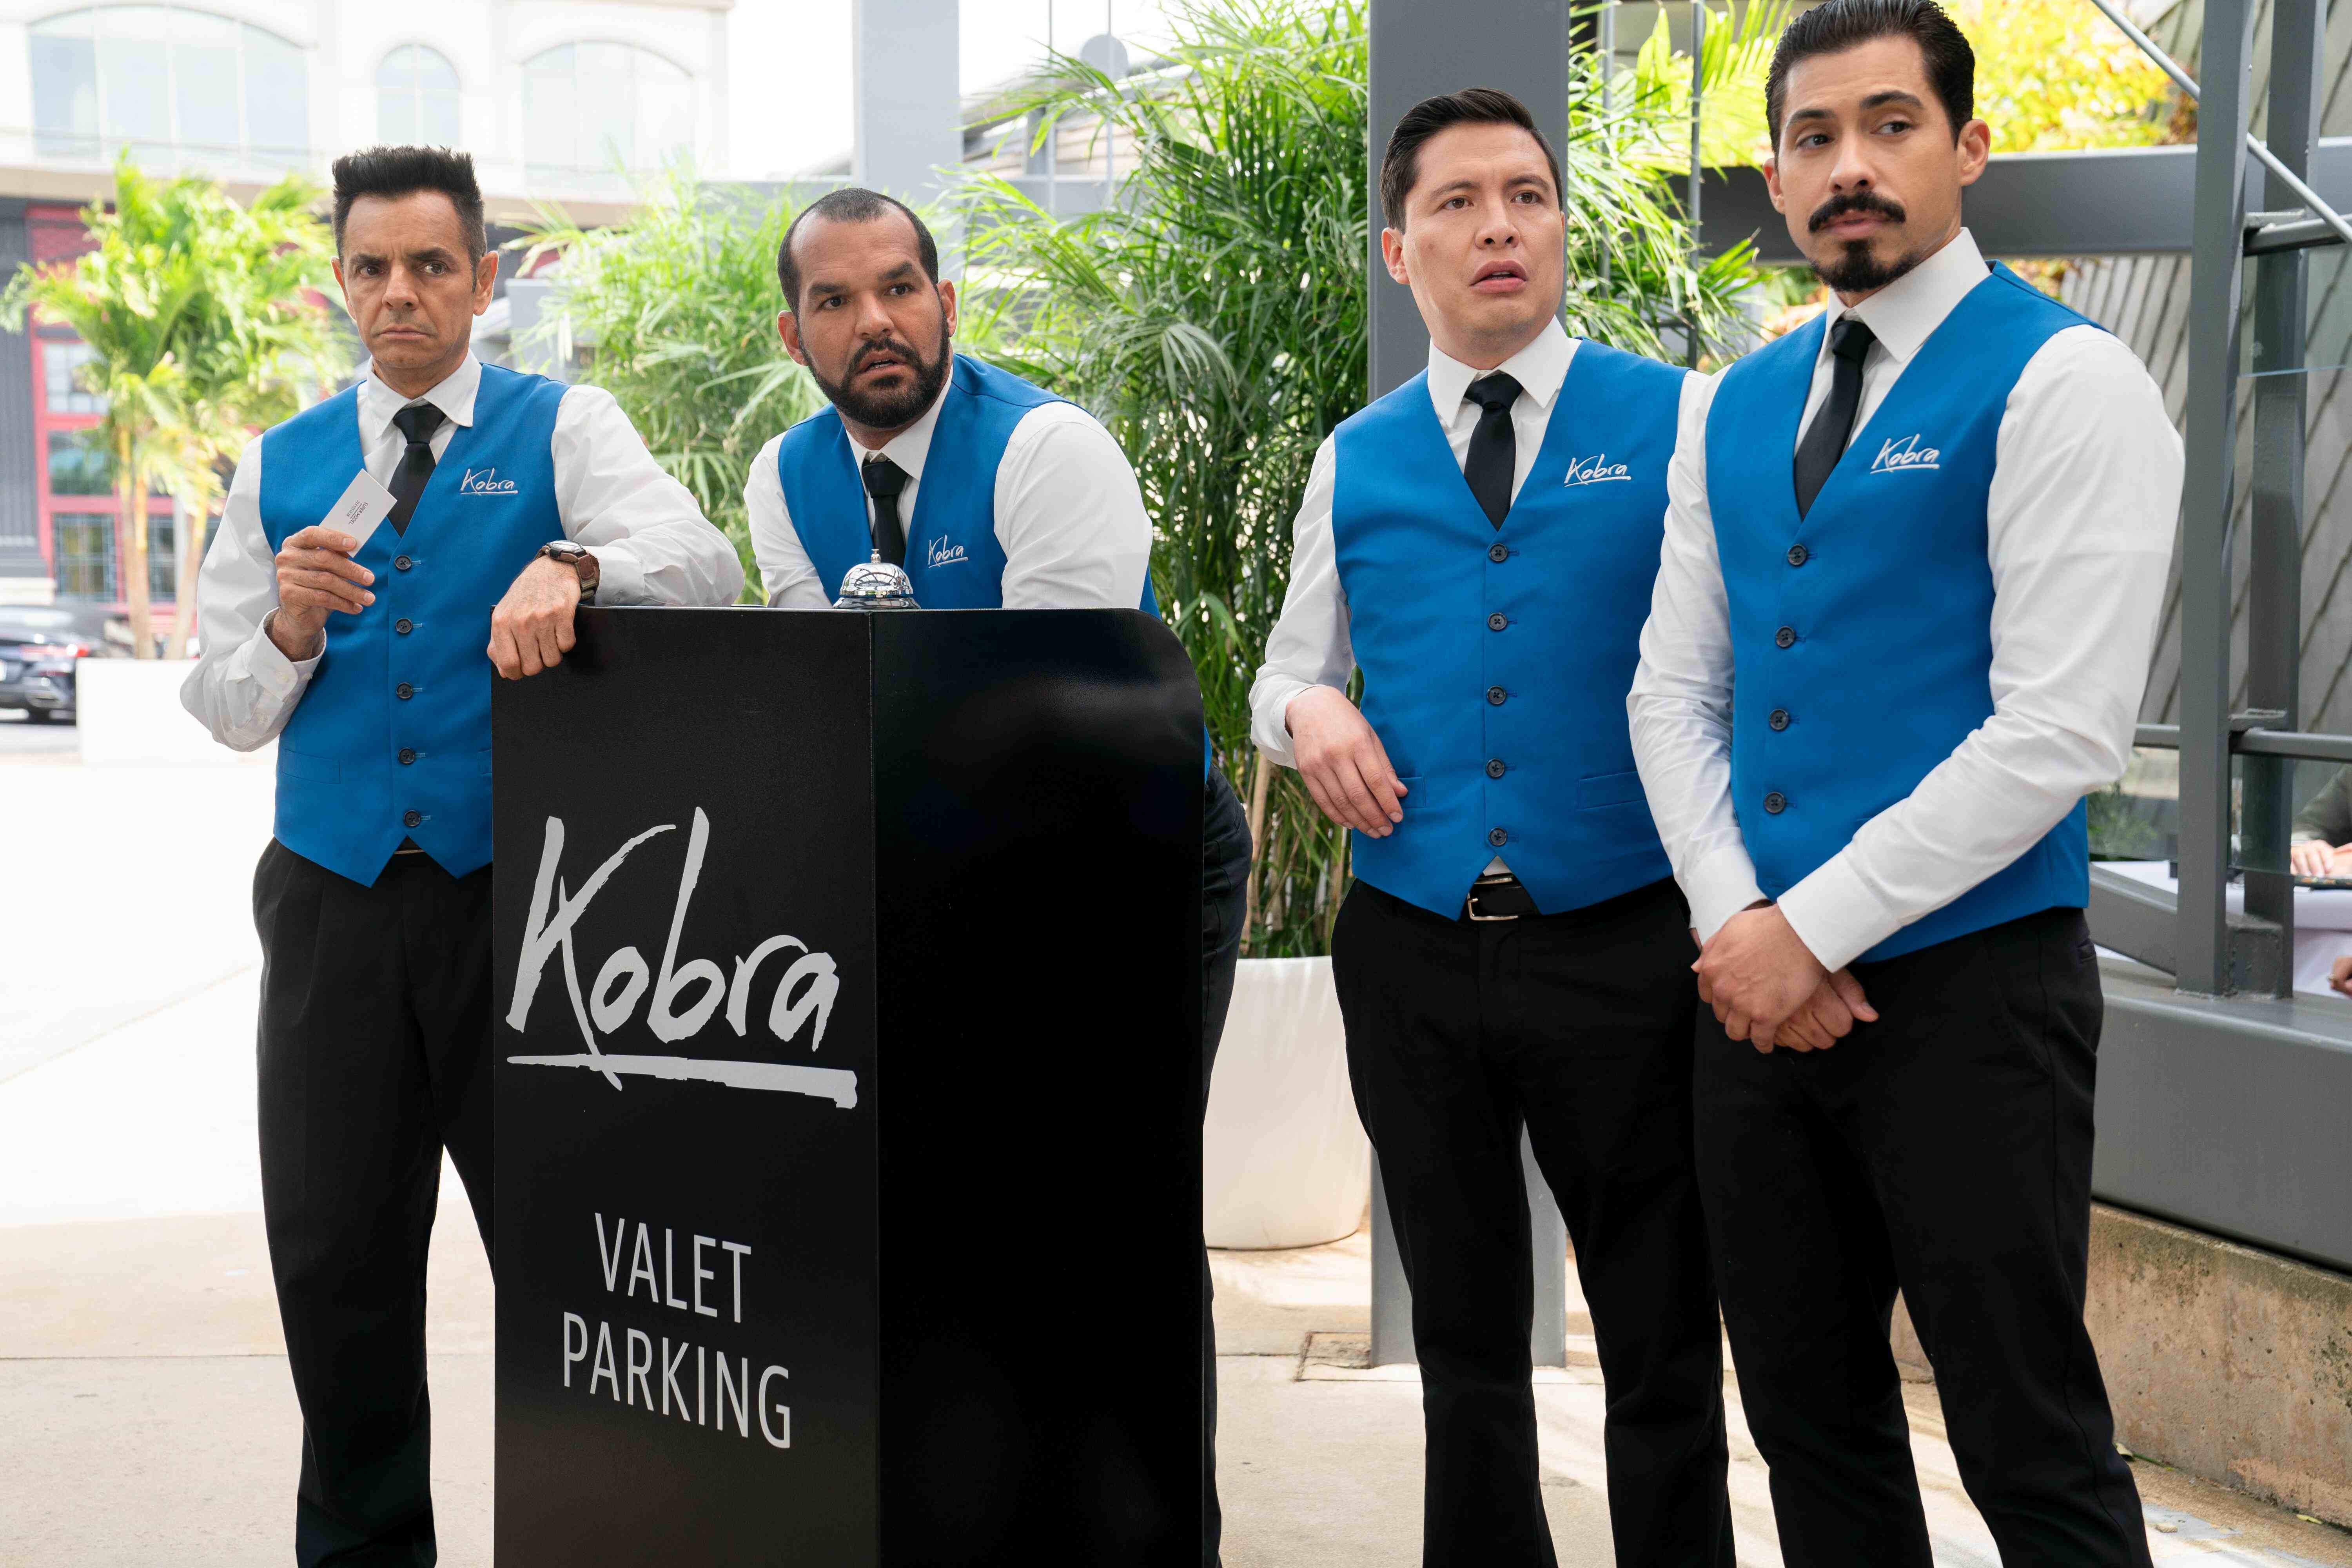 Is The Valet a True Story? Is the Movie Based on Real Life?